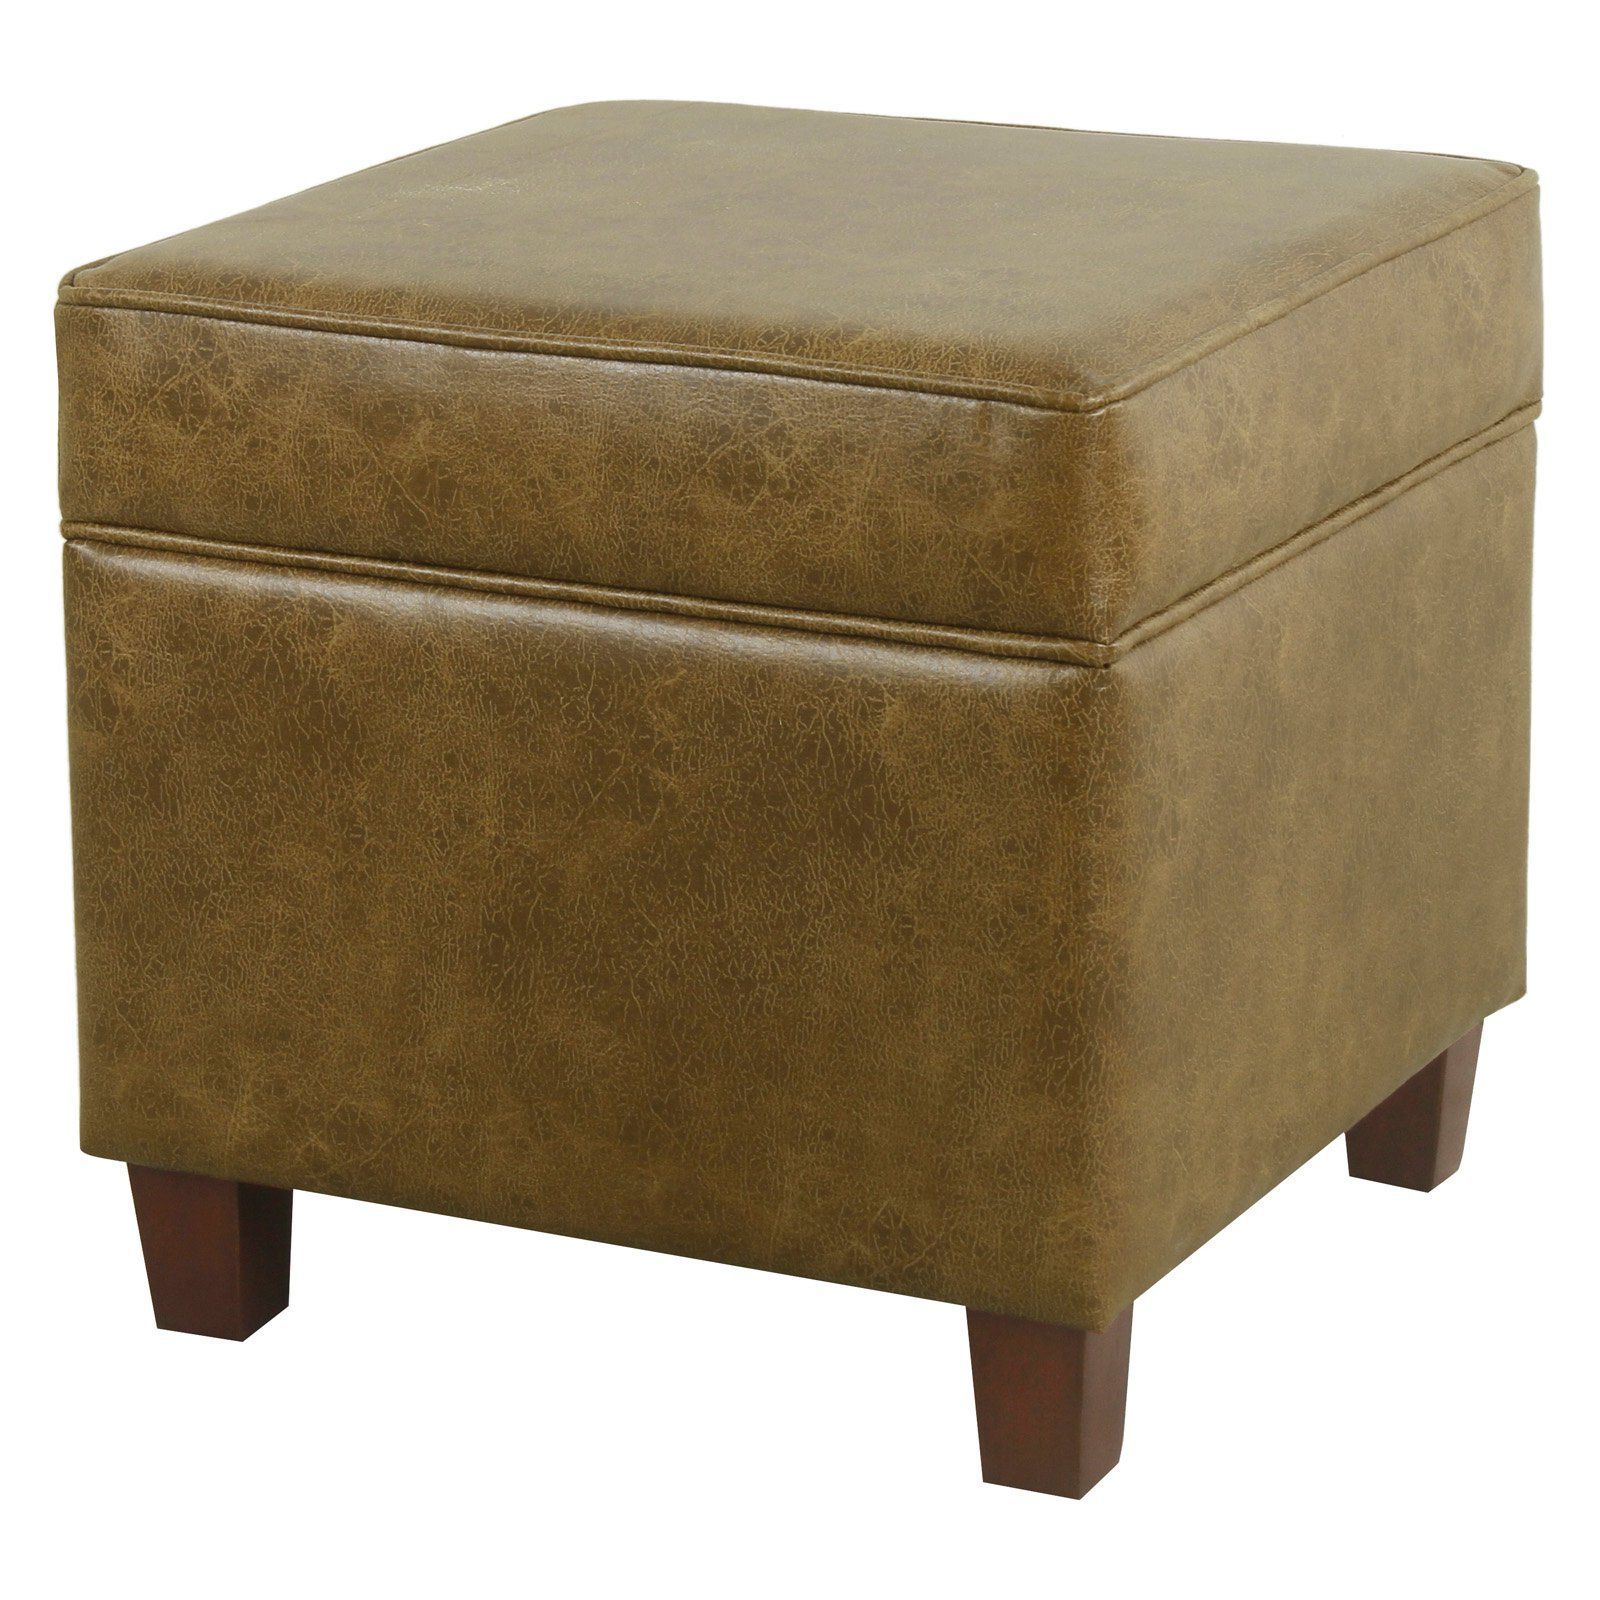 Brown Leather Square Pouf Ottomans For Fashionable Homepop Square Faux Leather Ottoman (View 1 of 10)